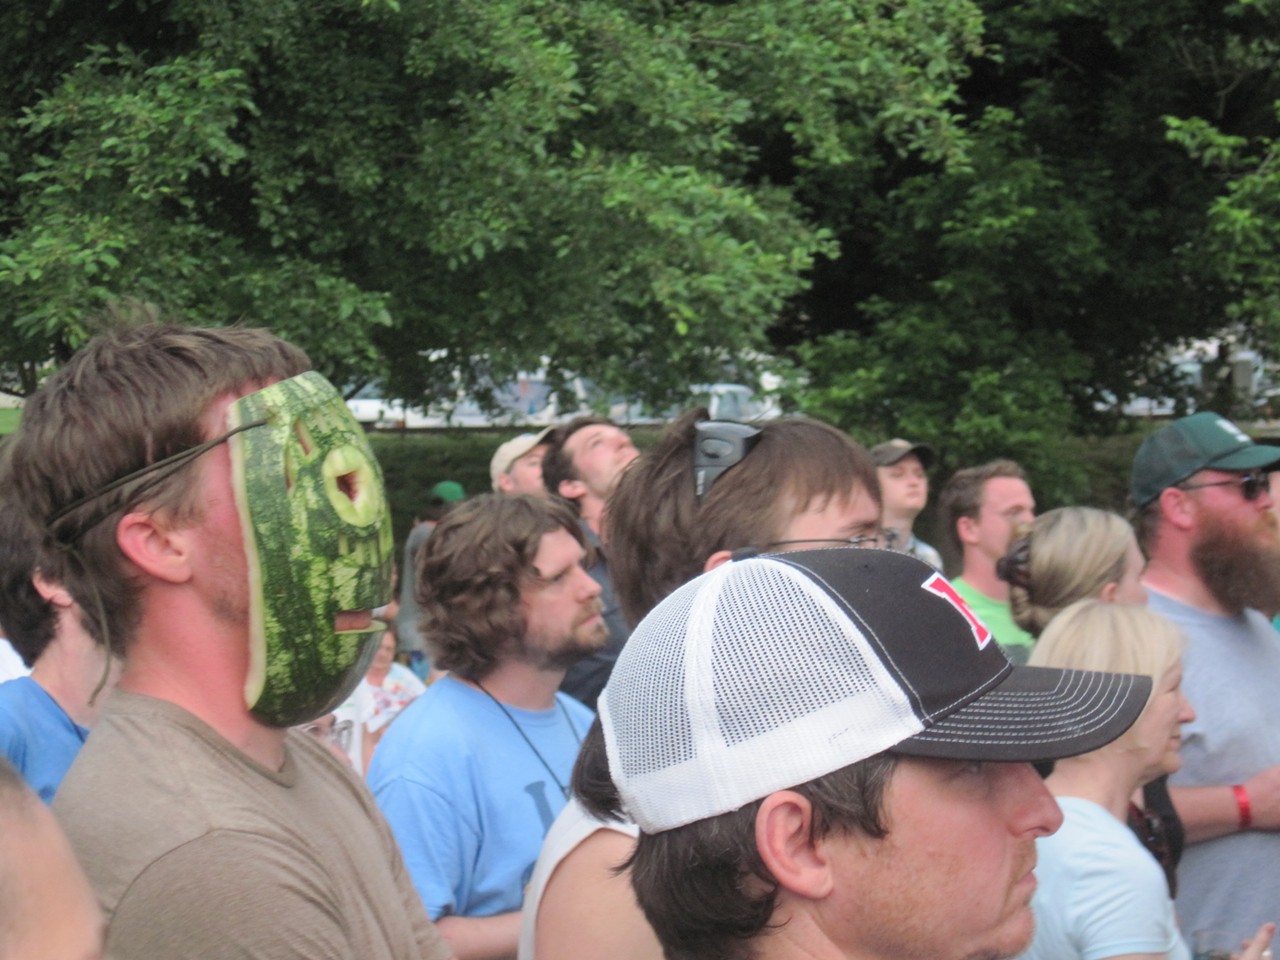 Even people with watermelons for faces like the music.